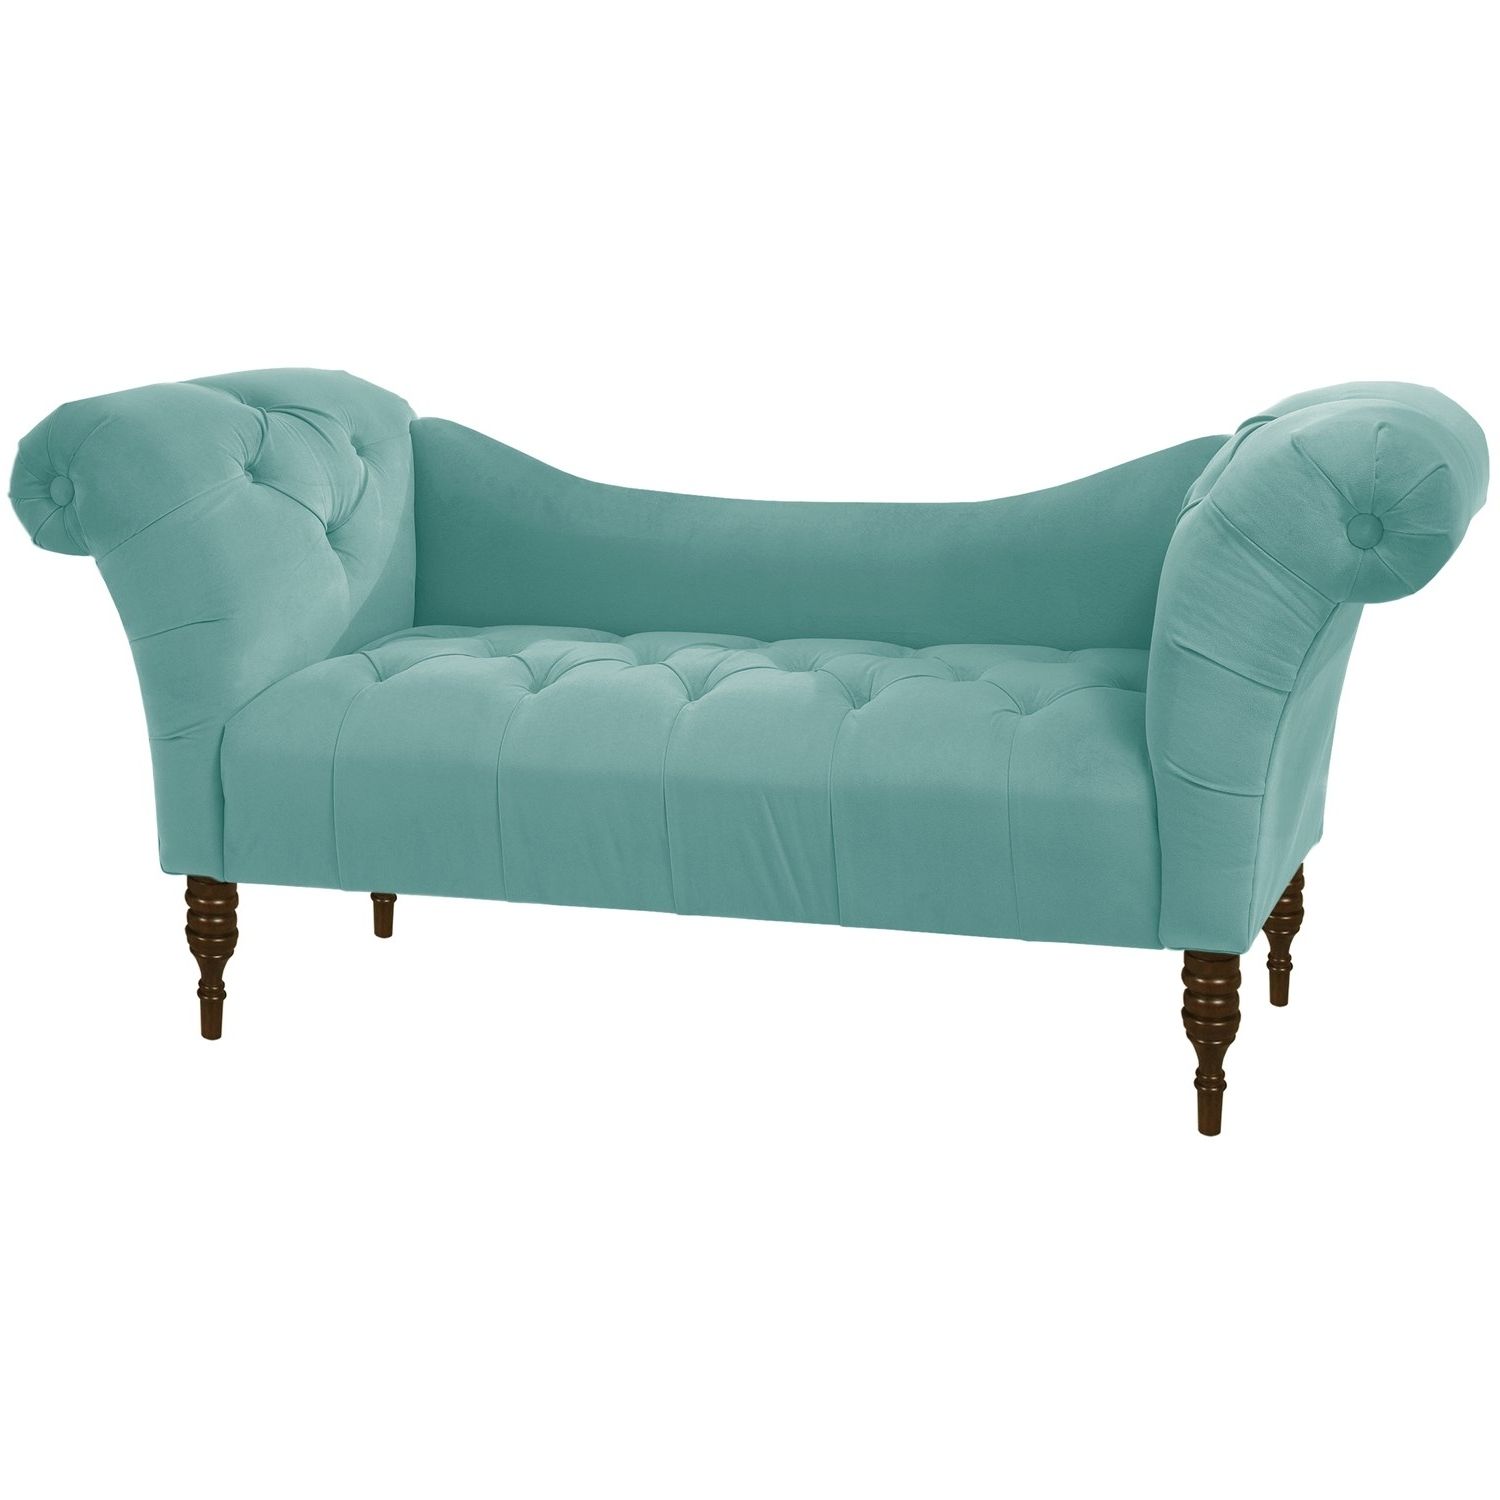 Skyline 6006vlv Tufted Chaise Lounge – Homeclick Throughout Latest Tufted Chaises (View 8 of 15)